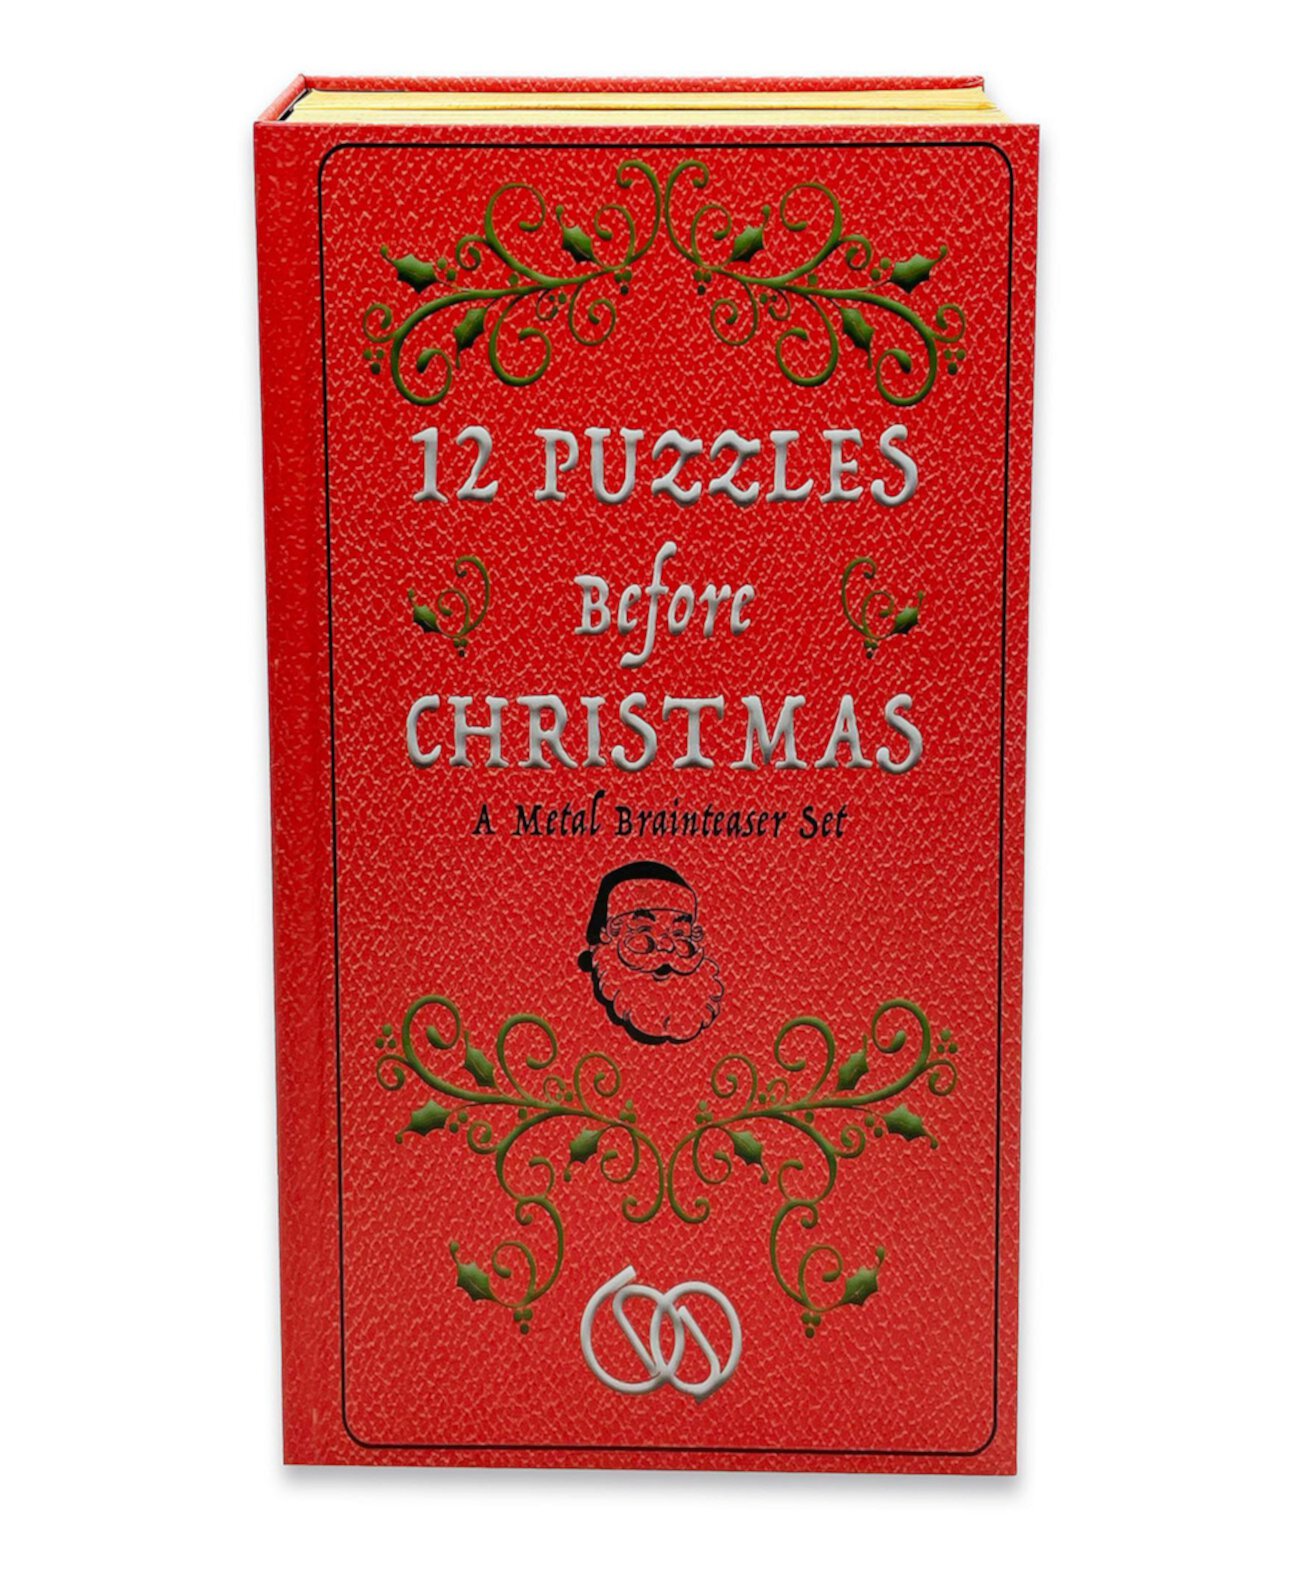 Holly Jolly - 12 Puzzles Before Christmas - Advent Calendar Book Project Genius